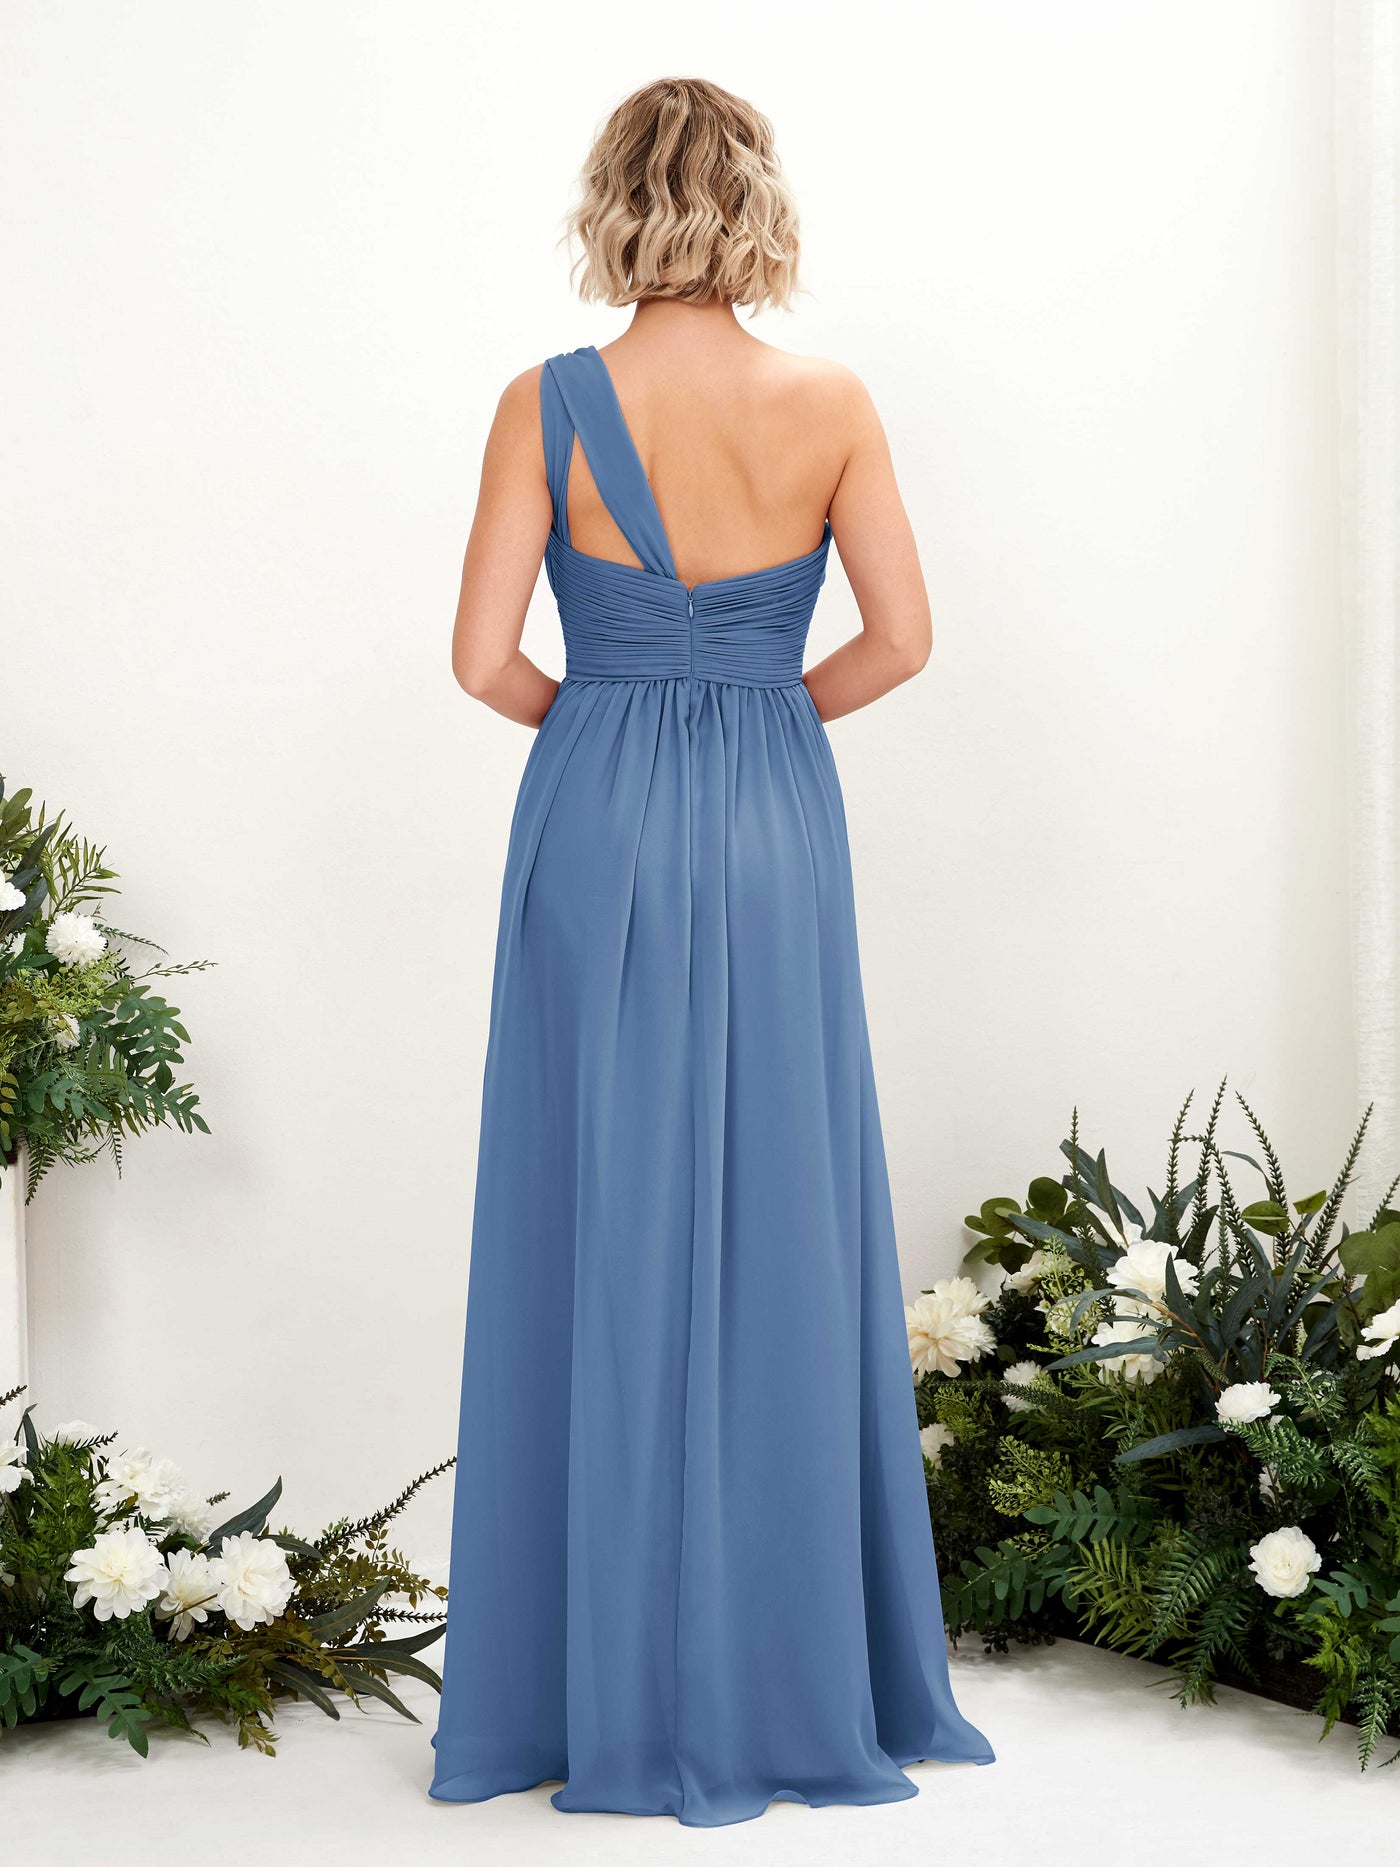 Dusty Blue Bridesmaid Dresses Bridesmaid Dress Ball Gown Chiffon One Shoulder Full Length Sleeveless Wedding Party Dress (81225010)#color_dusty-blue